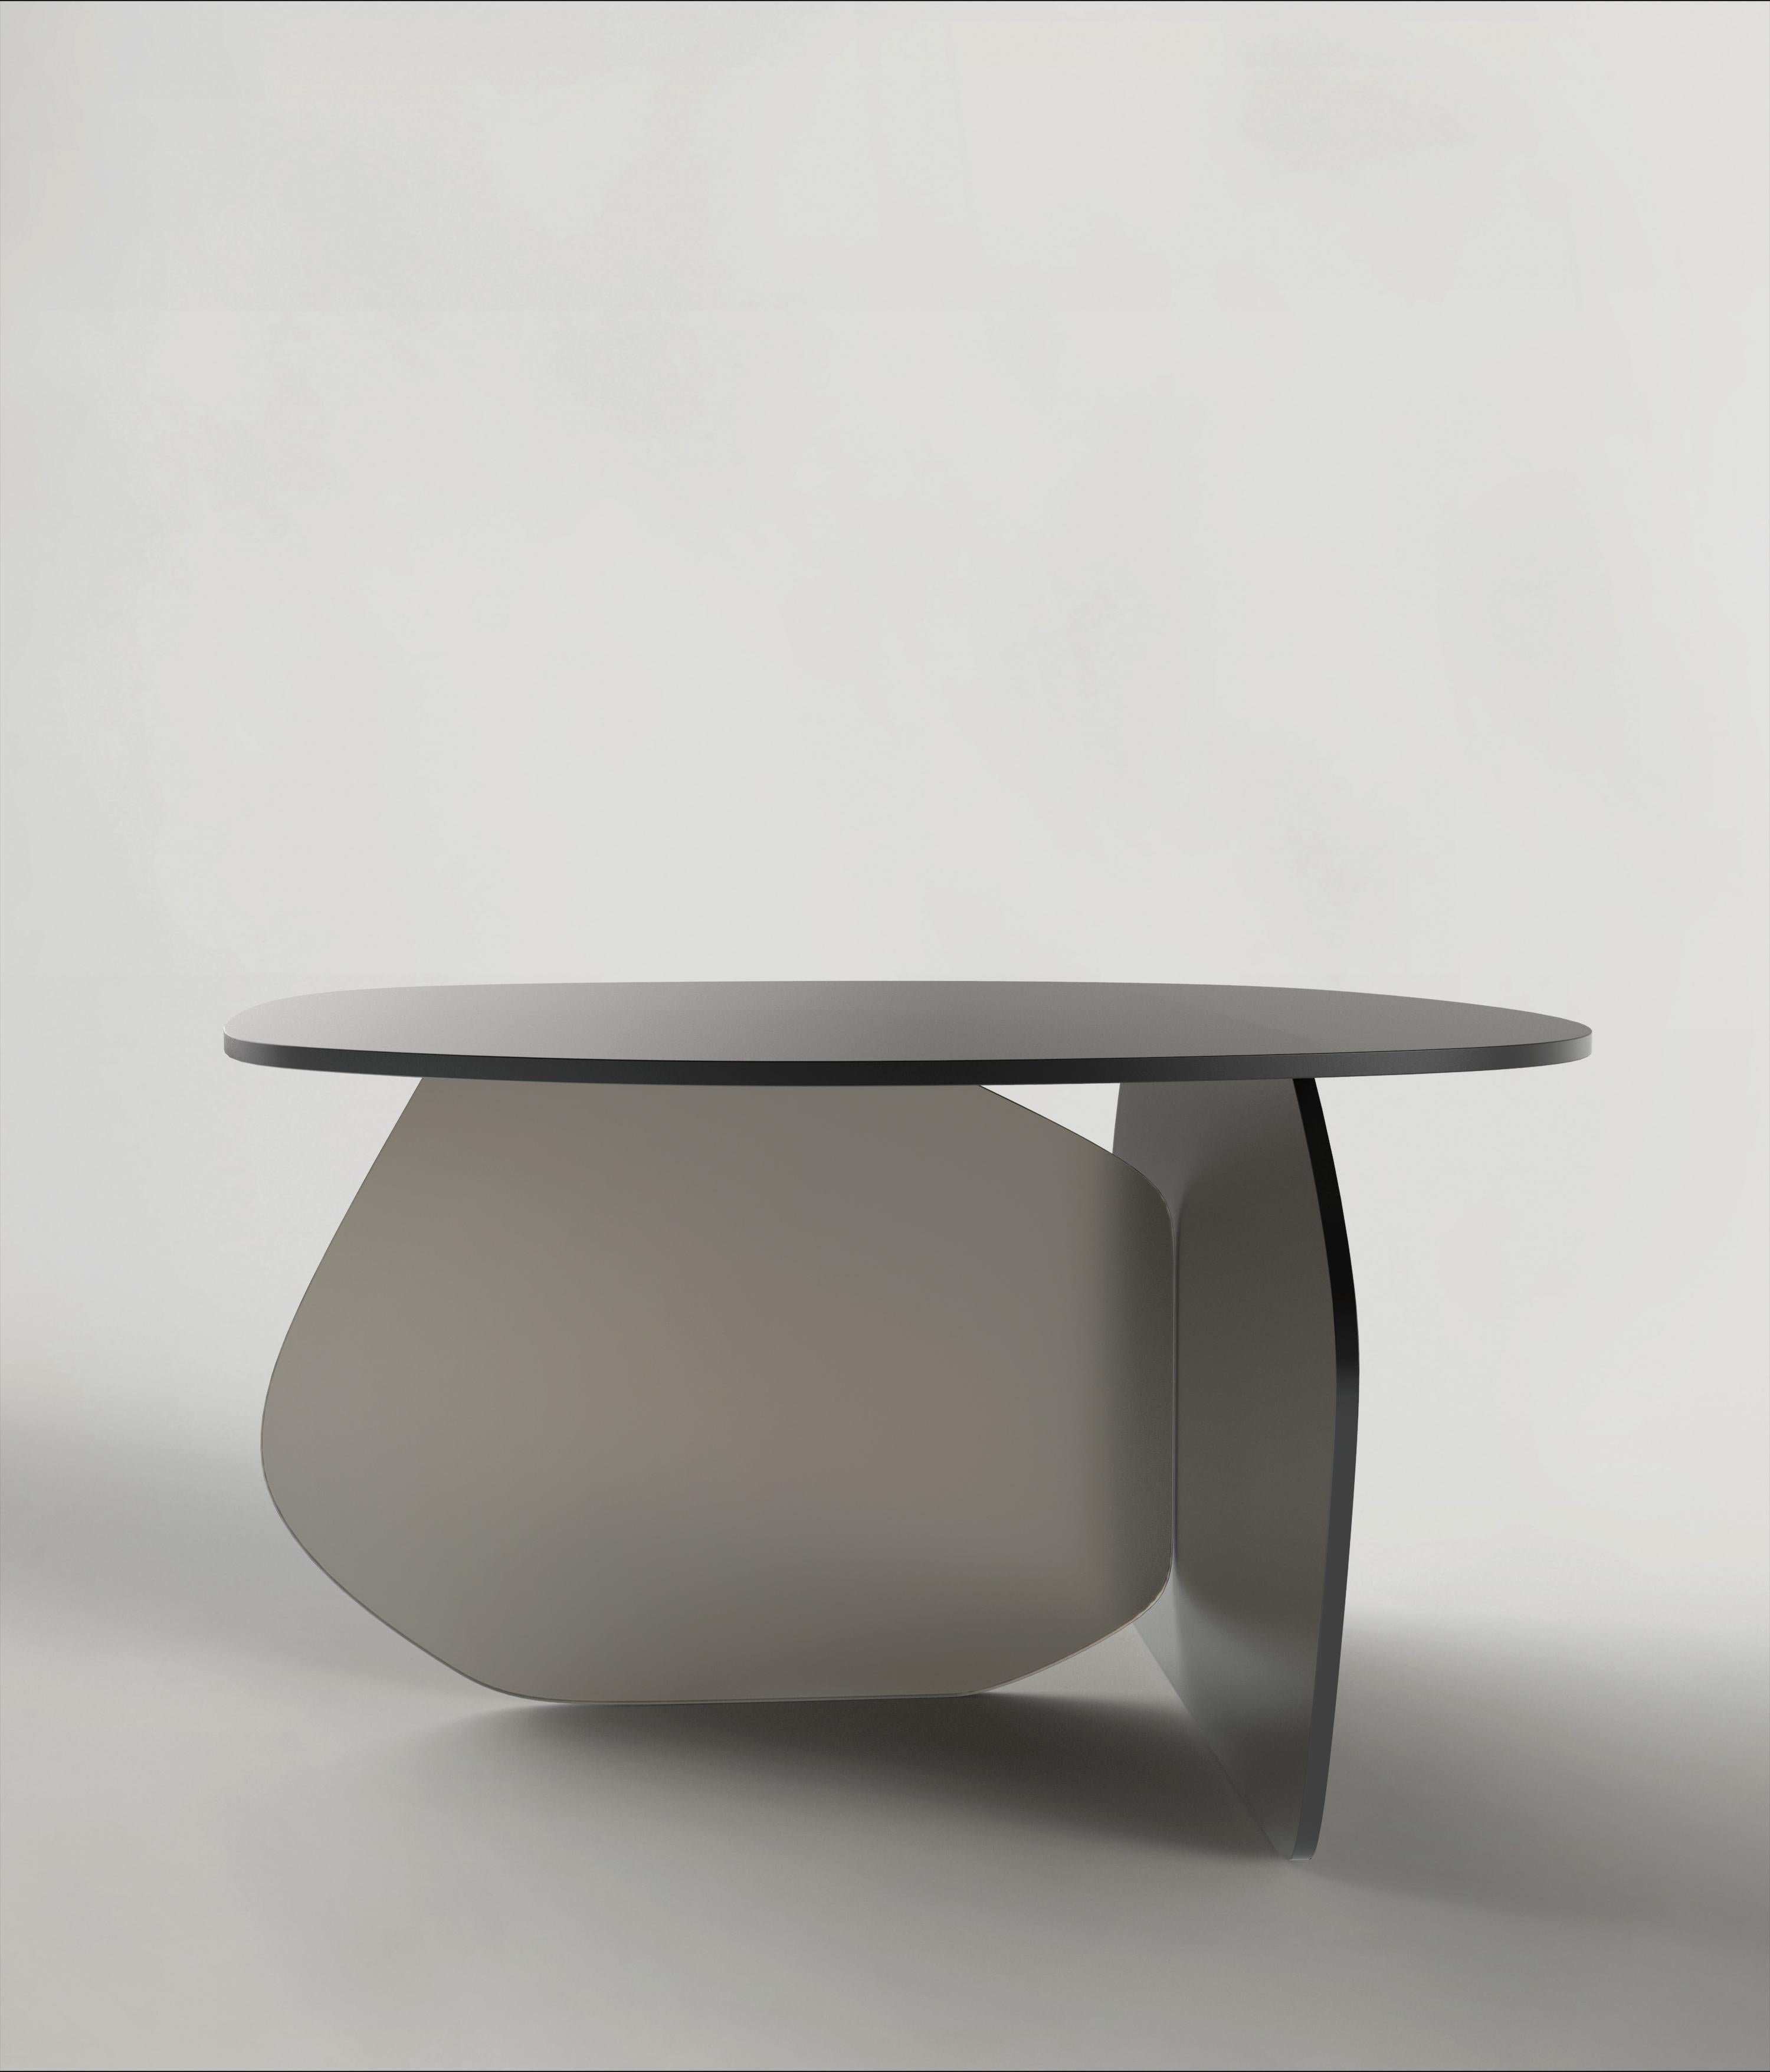 Italian Set of 2 Panorama V1 and V2 Tables by Edizione Limitata